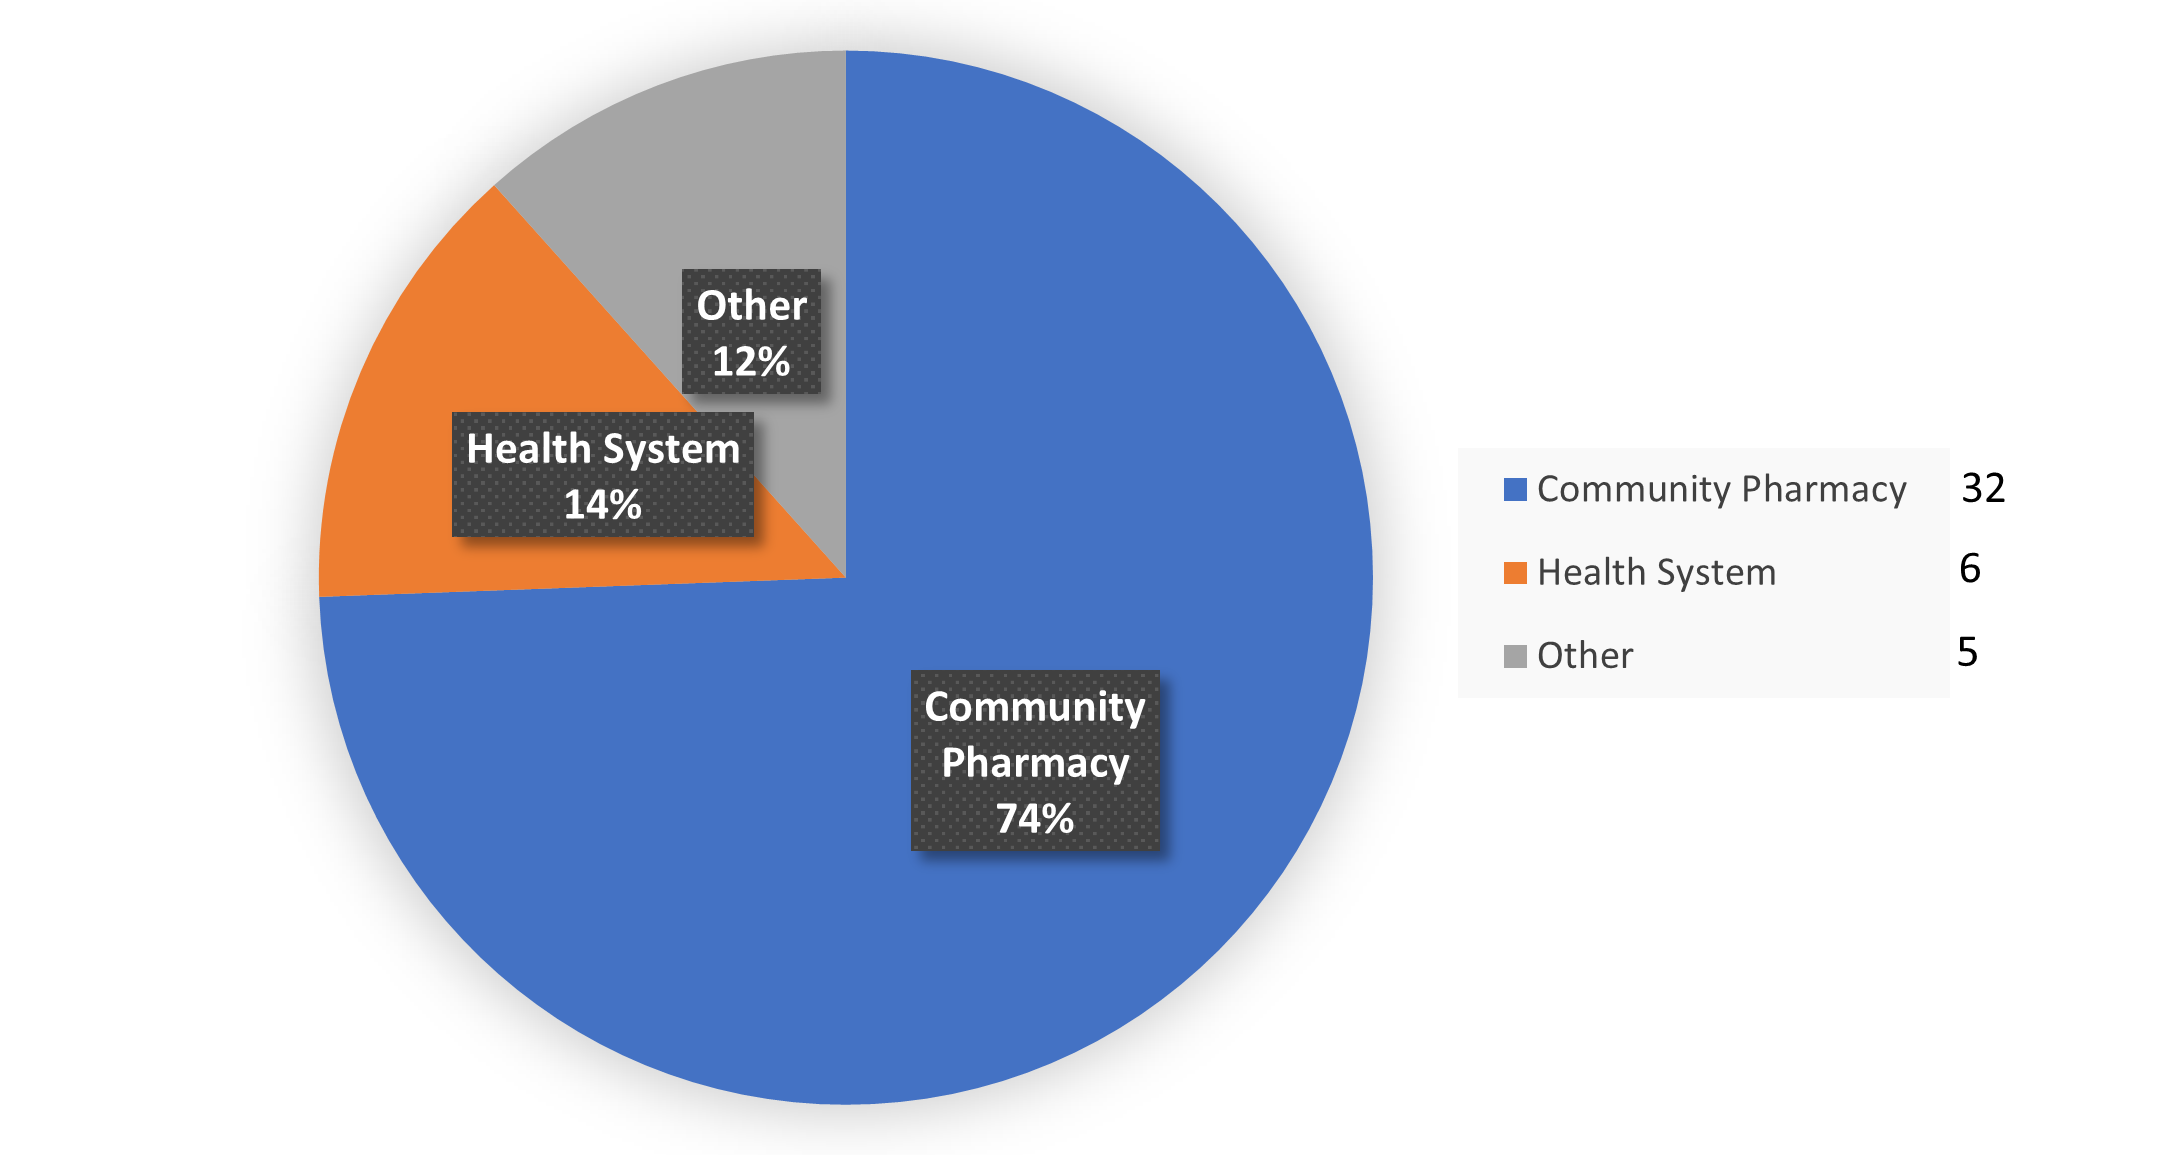 Graph of the site visit breakdown for 2022-23. Community pharmacy is 74%, health system is 14%, and other is 12%.